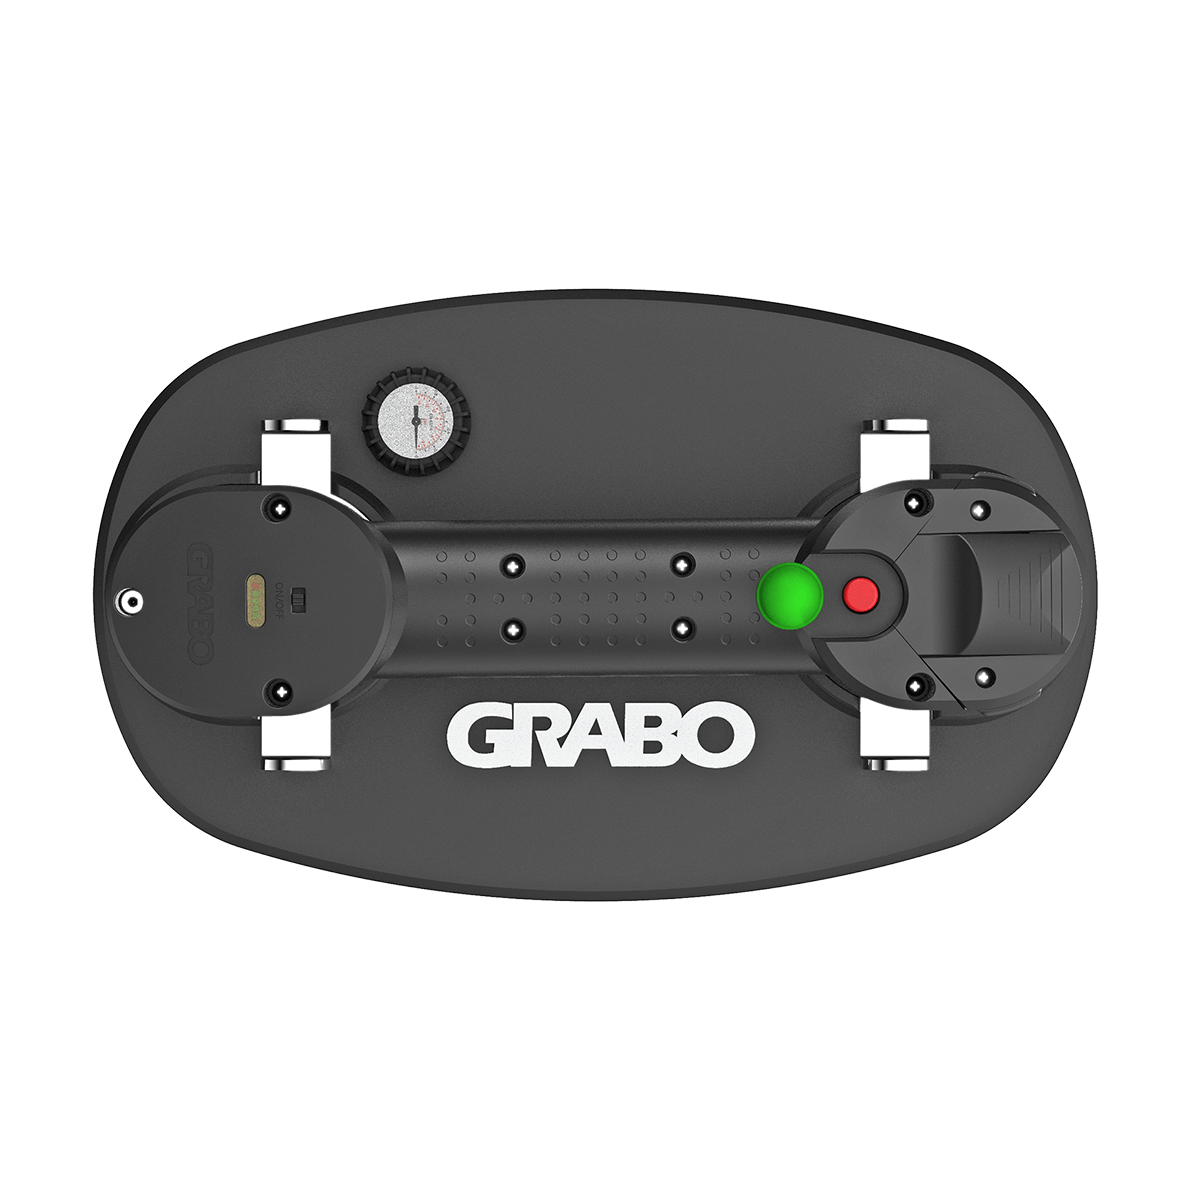 Nemo GRABO Classic - The electric suction cup 2 batteries and 2 seals